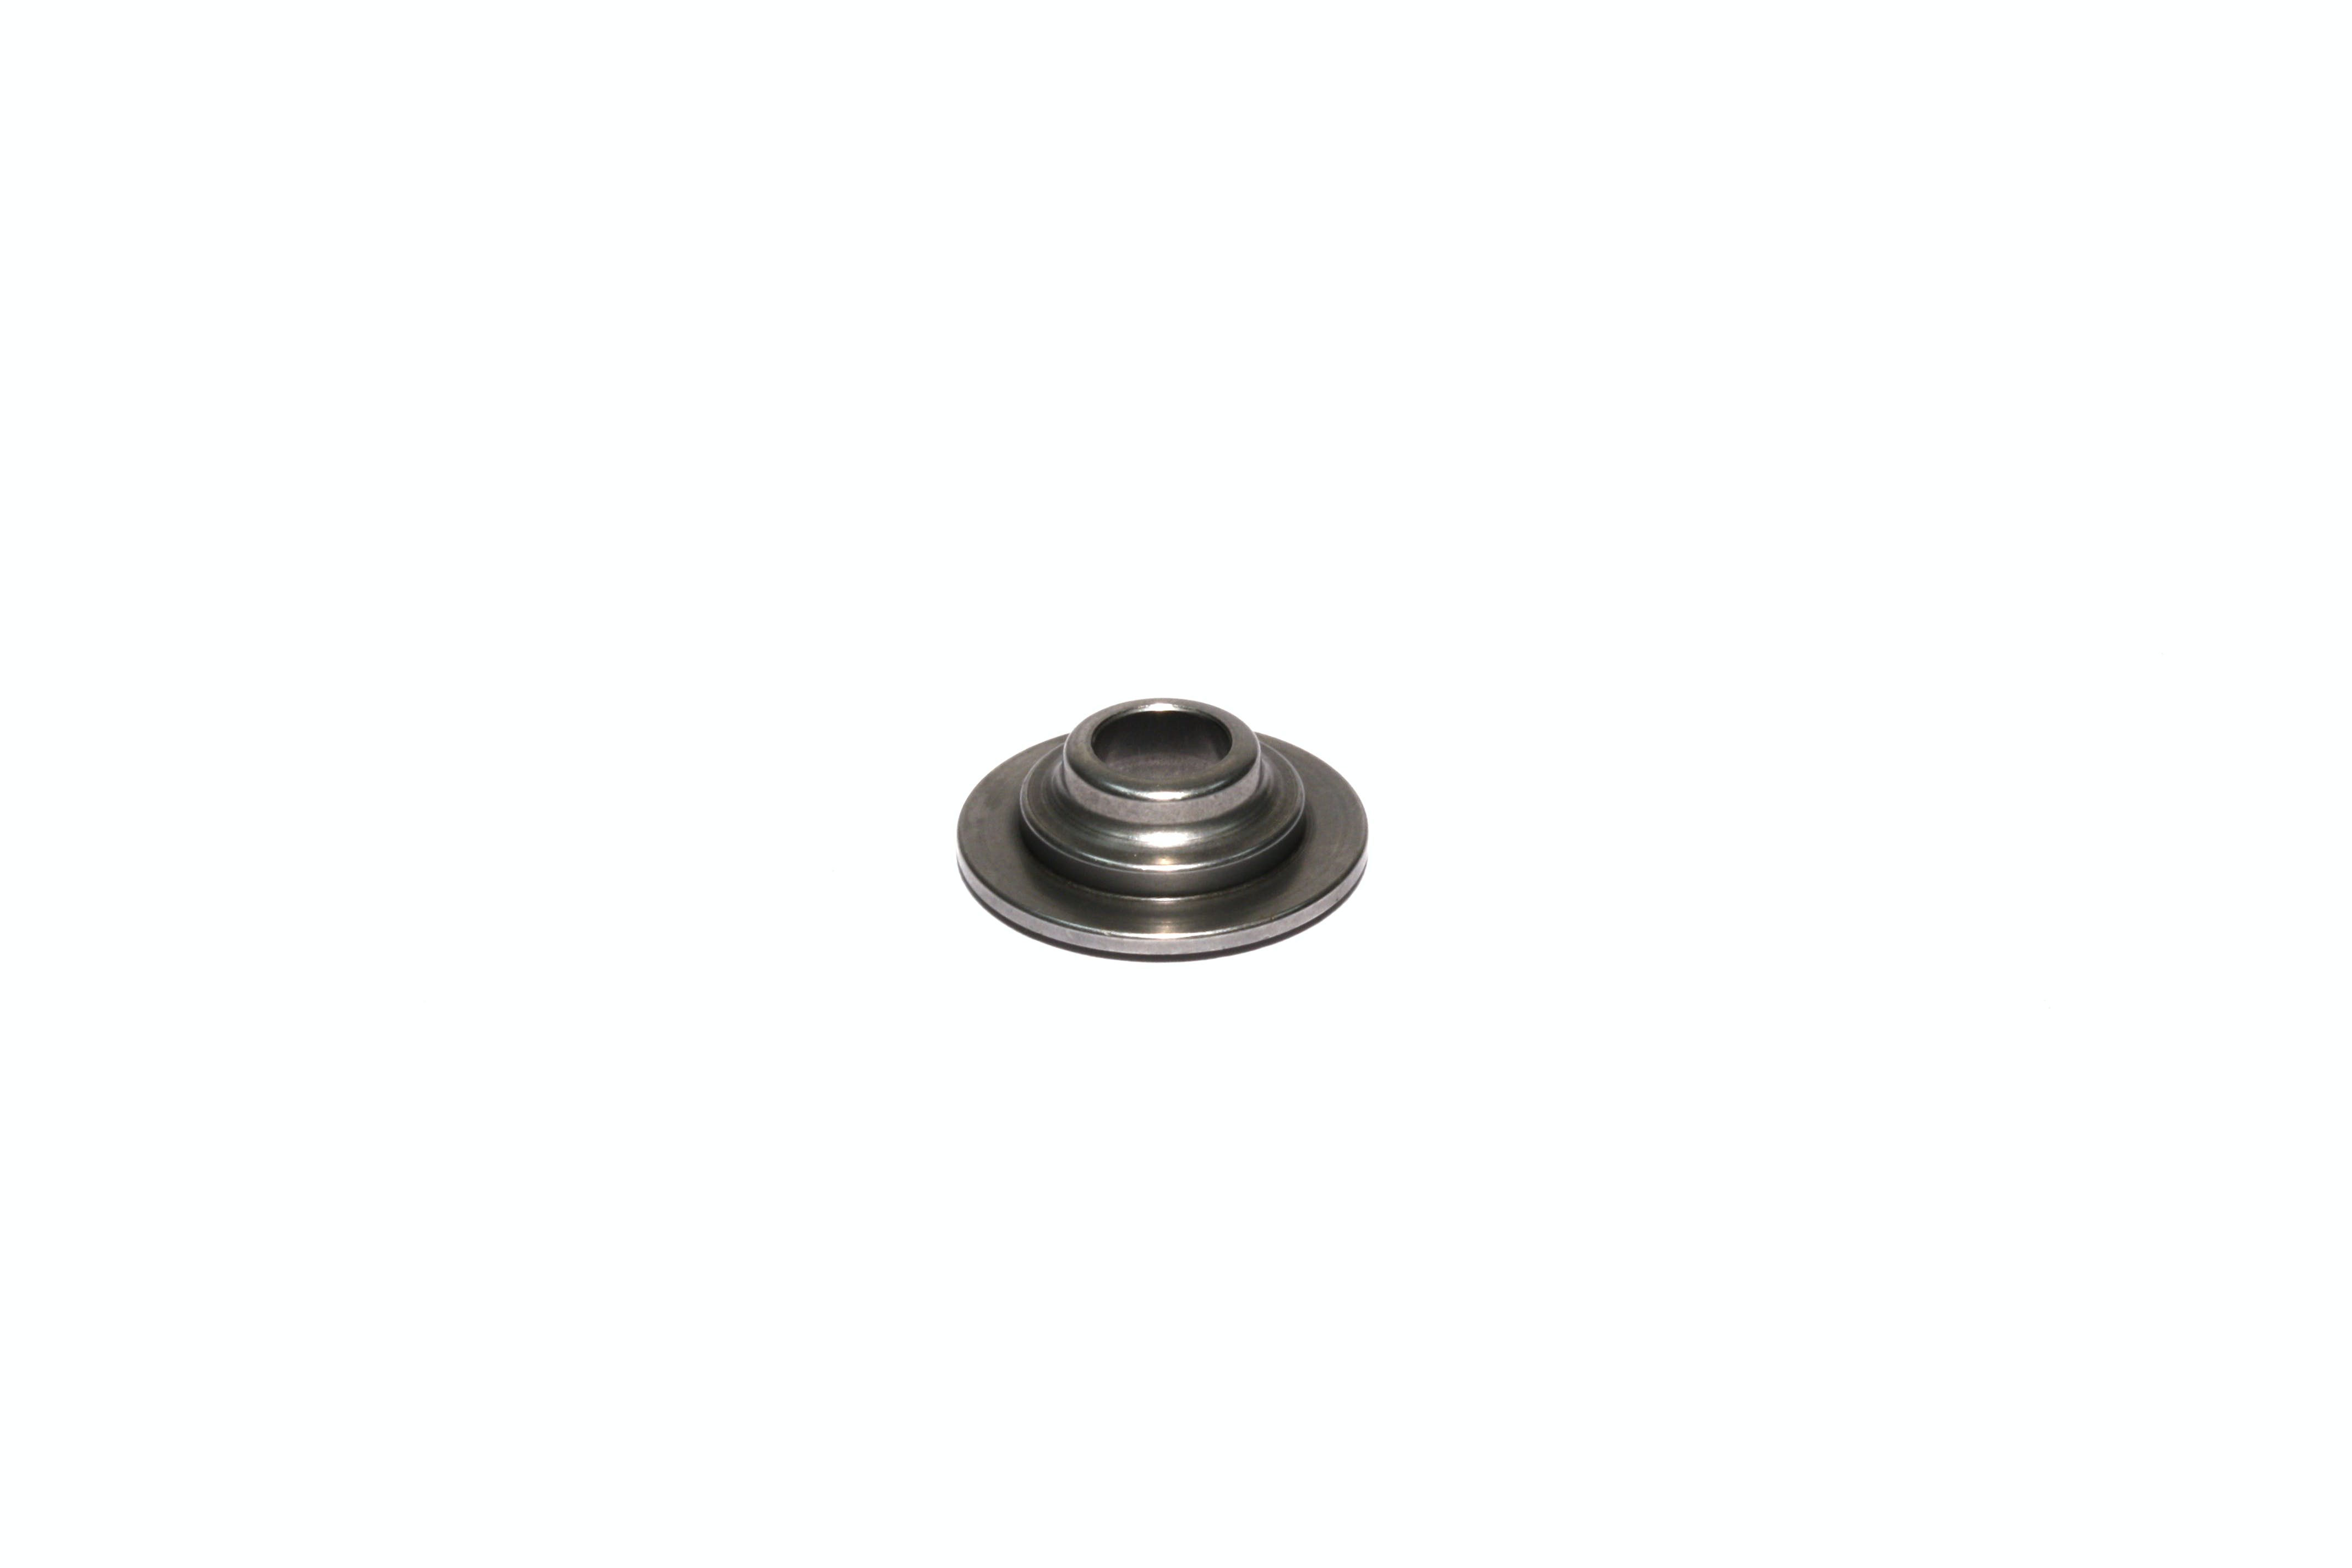 Competition Cams 1757-1 7 Tool Steel Retainer for 7mm Valve for 26056 Spring